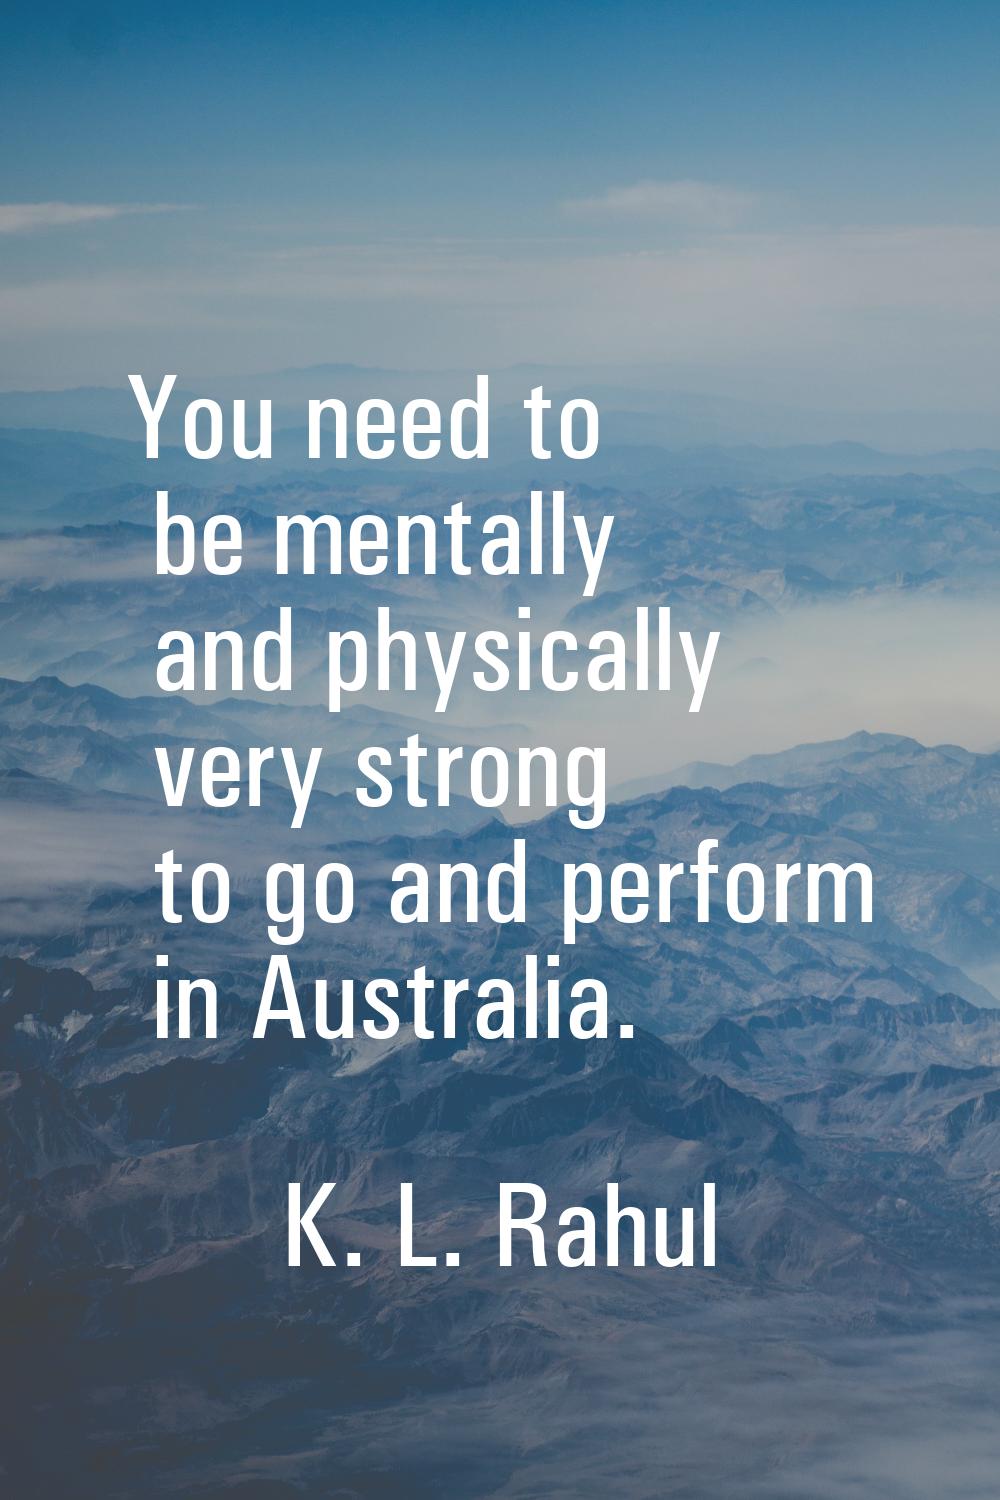 You need to be mentally and physically very strong to go and perform in Australia.